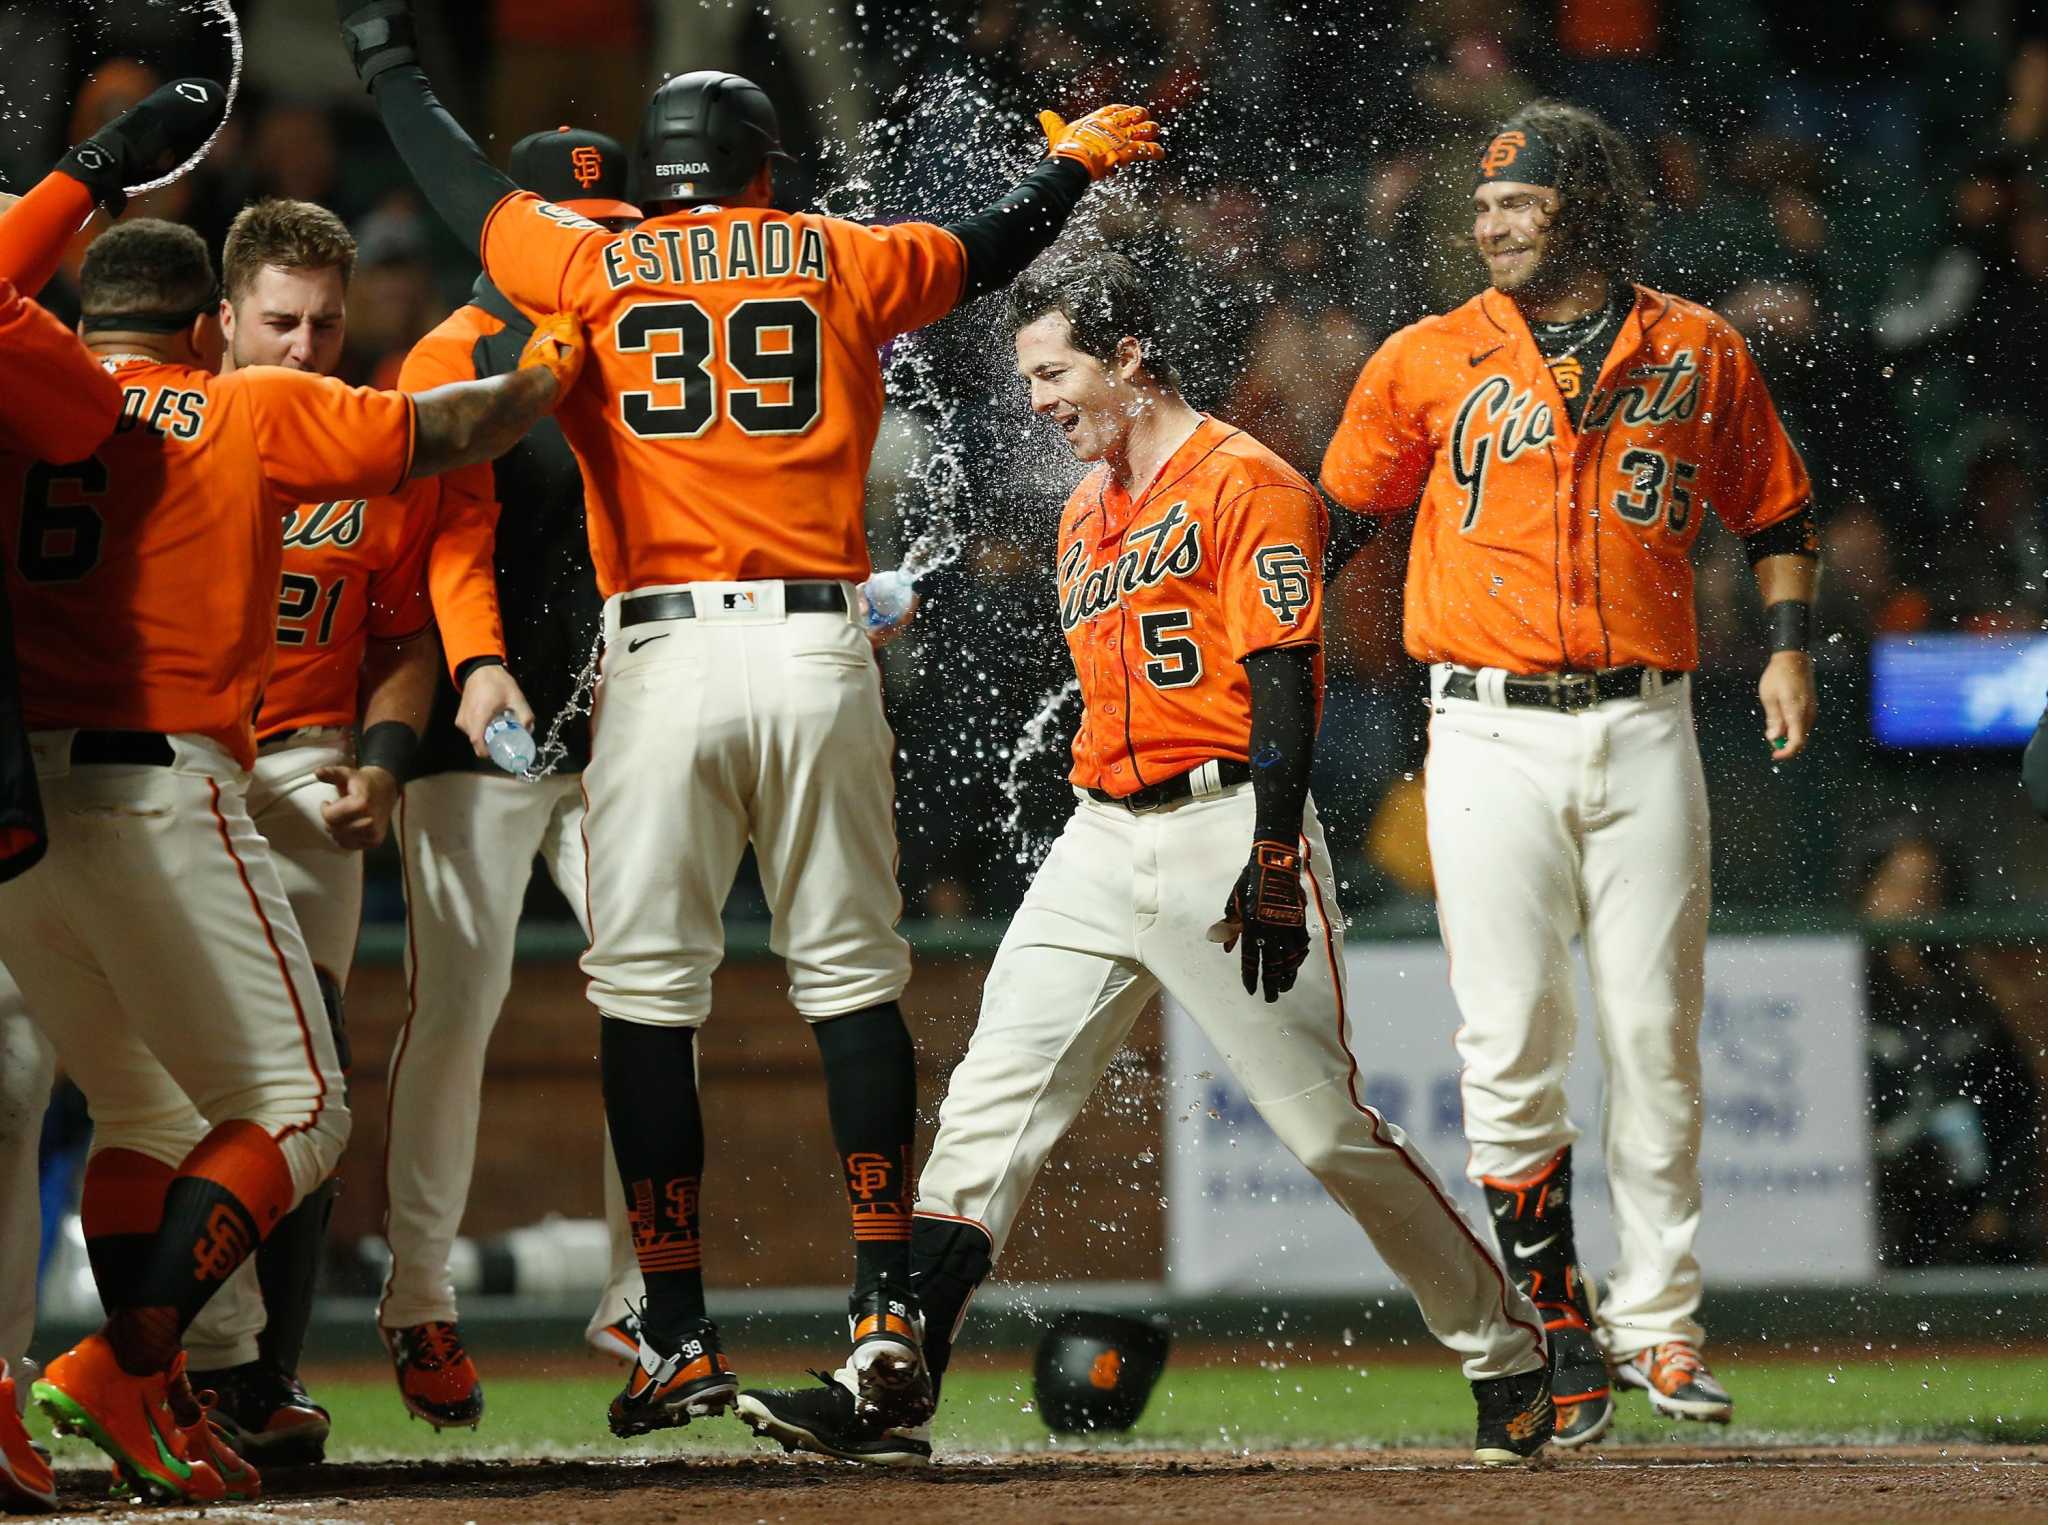 Wilmer Flores' roller-coaster week ends with walk-off 